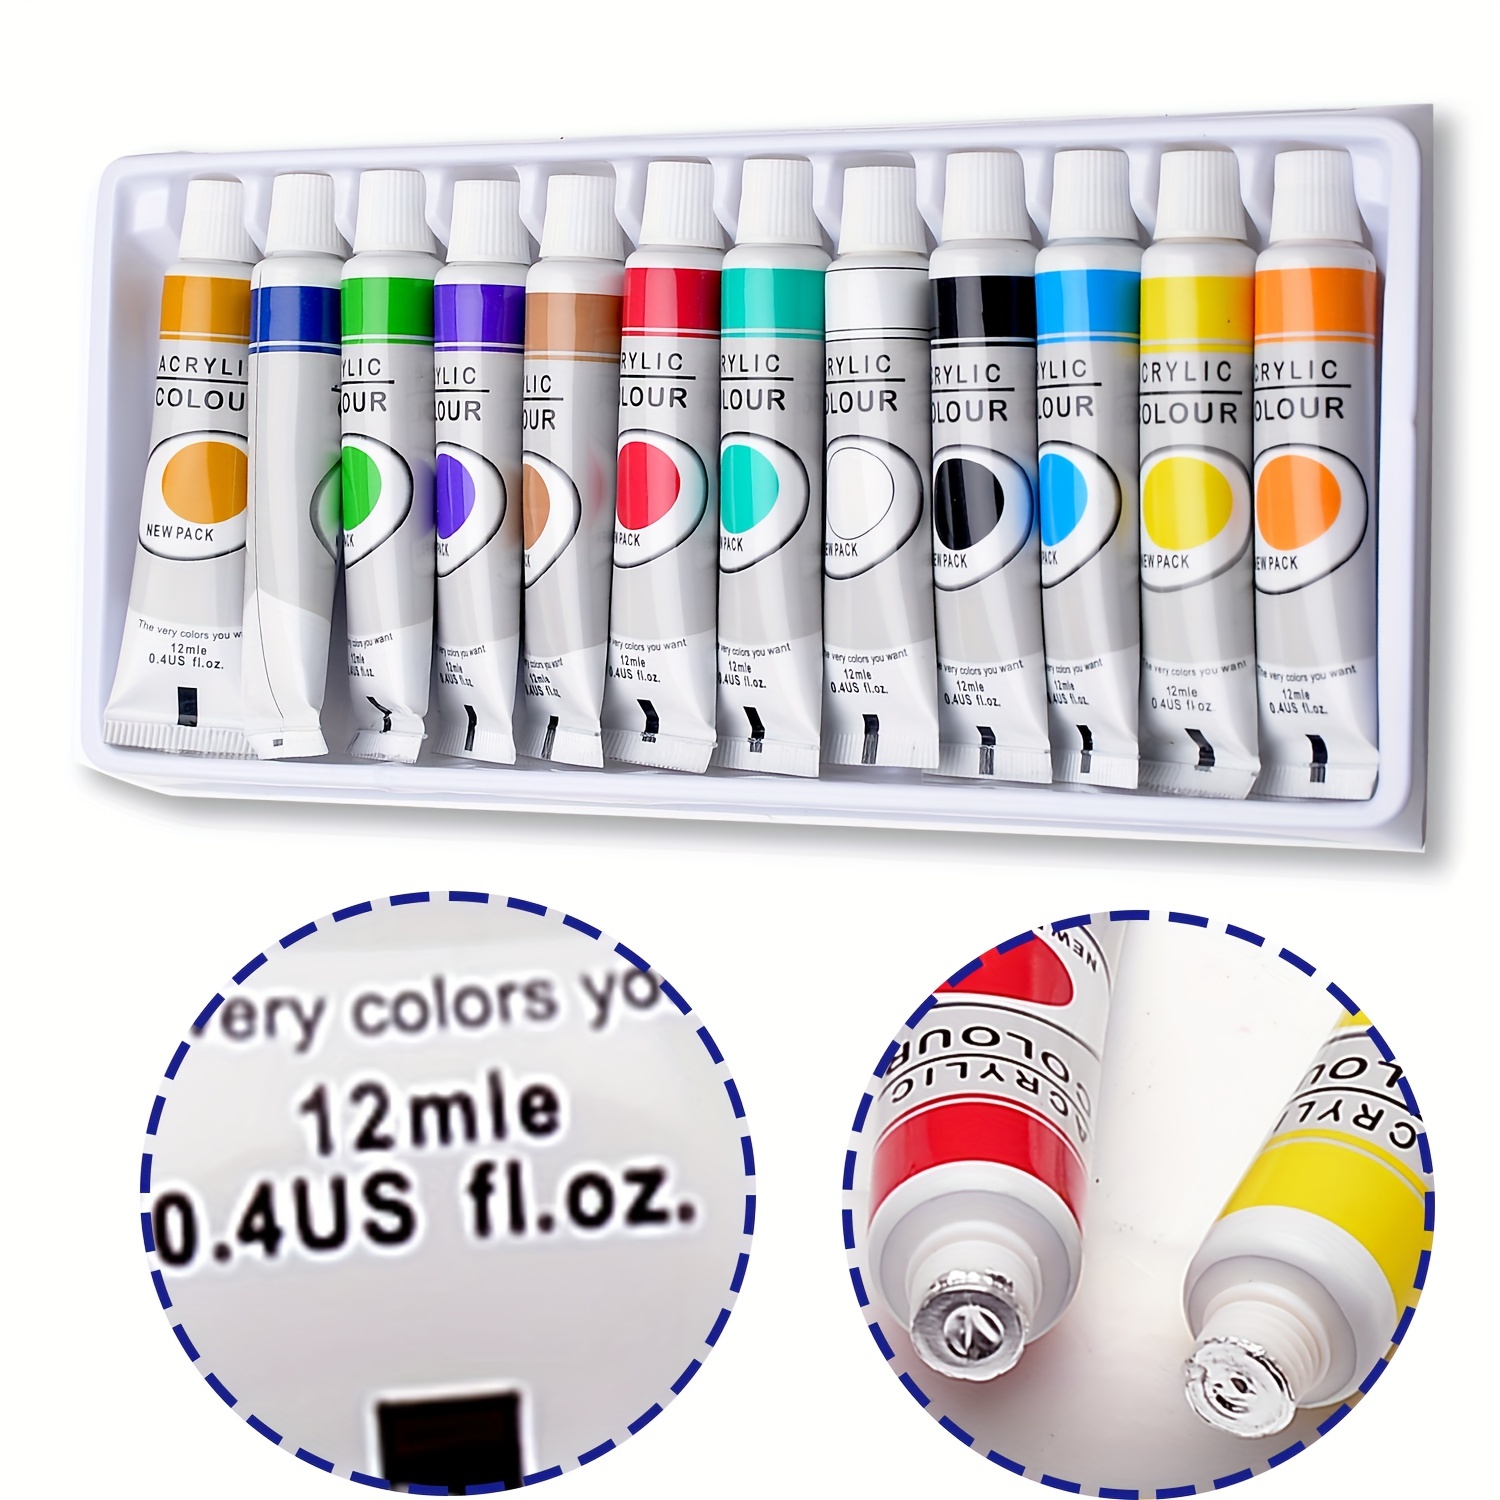 Shuttle Art Fabric Markers Pens, 30 Colors Dual Tip Fabric Markers  Permanent No Bleed Markers for T-Shirts Sneakers, Non-Toxic & Child Safe  Permanent Fabric Pens for Kids Adult Painting Writing